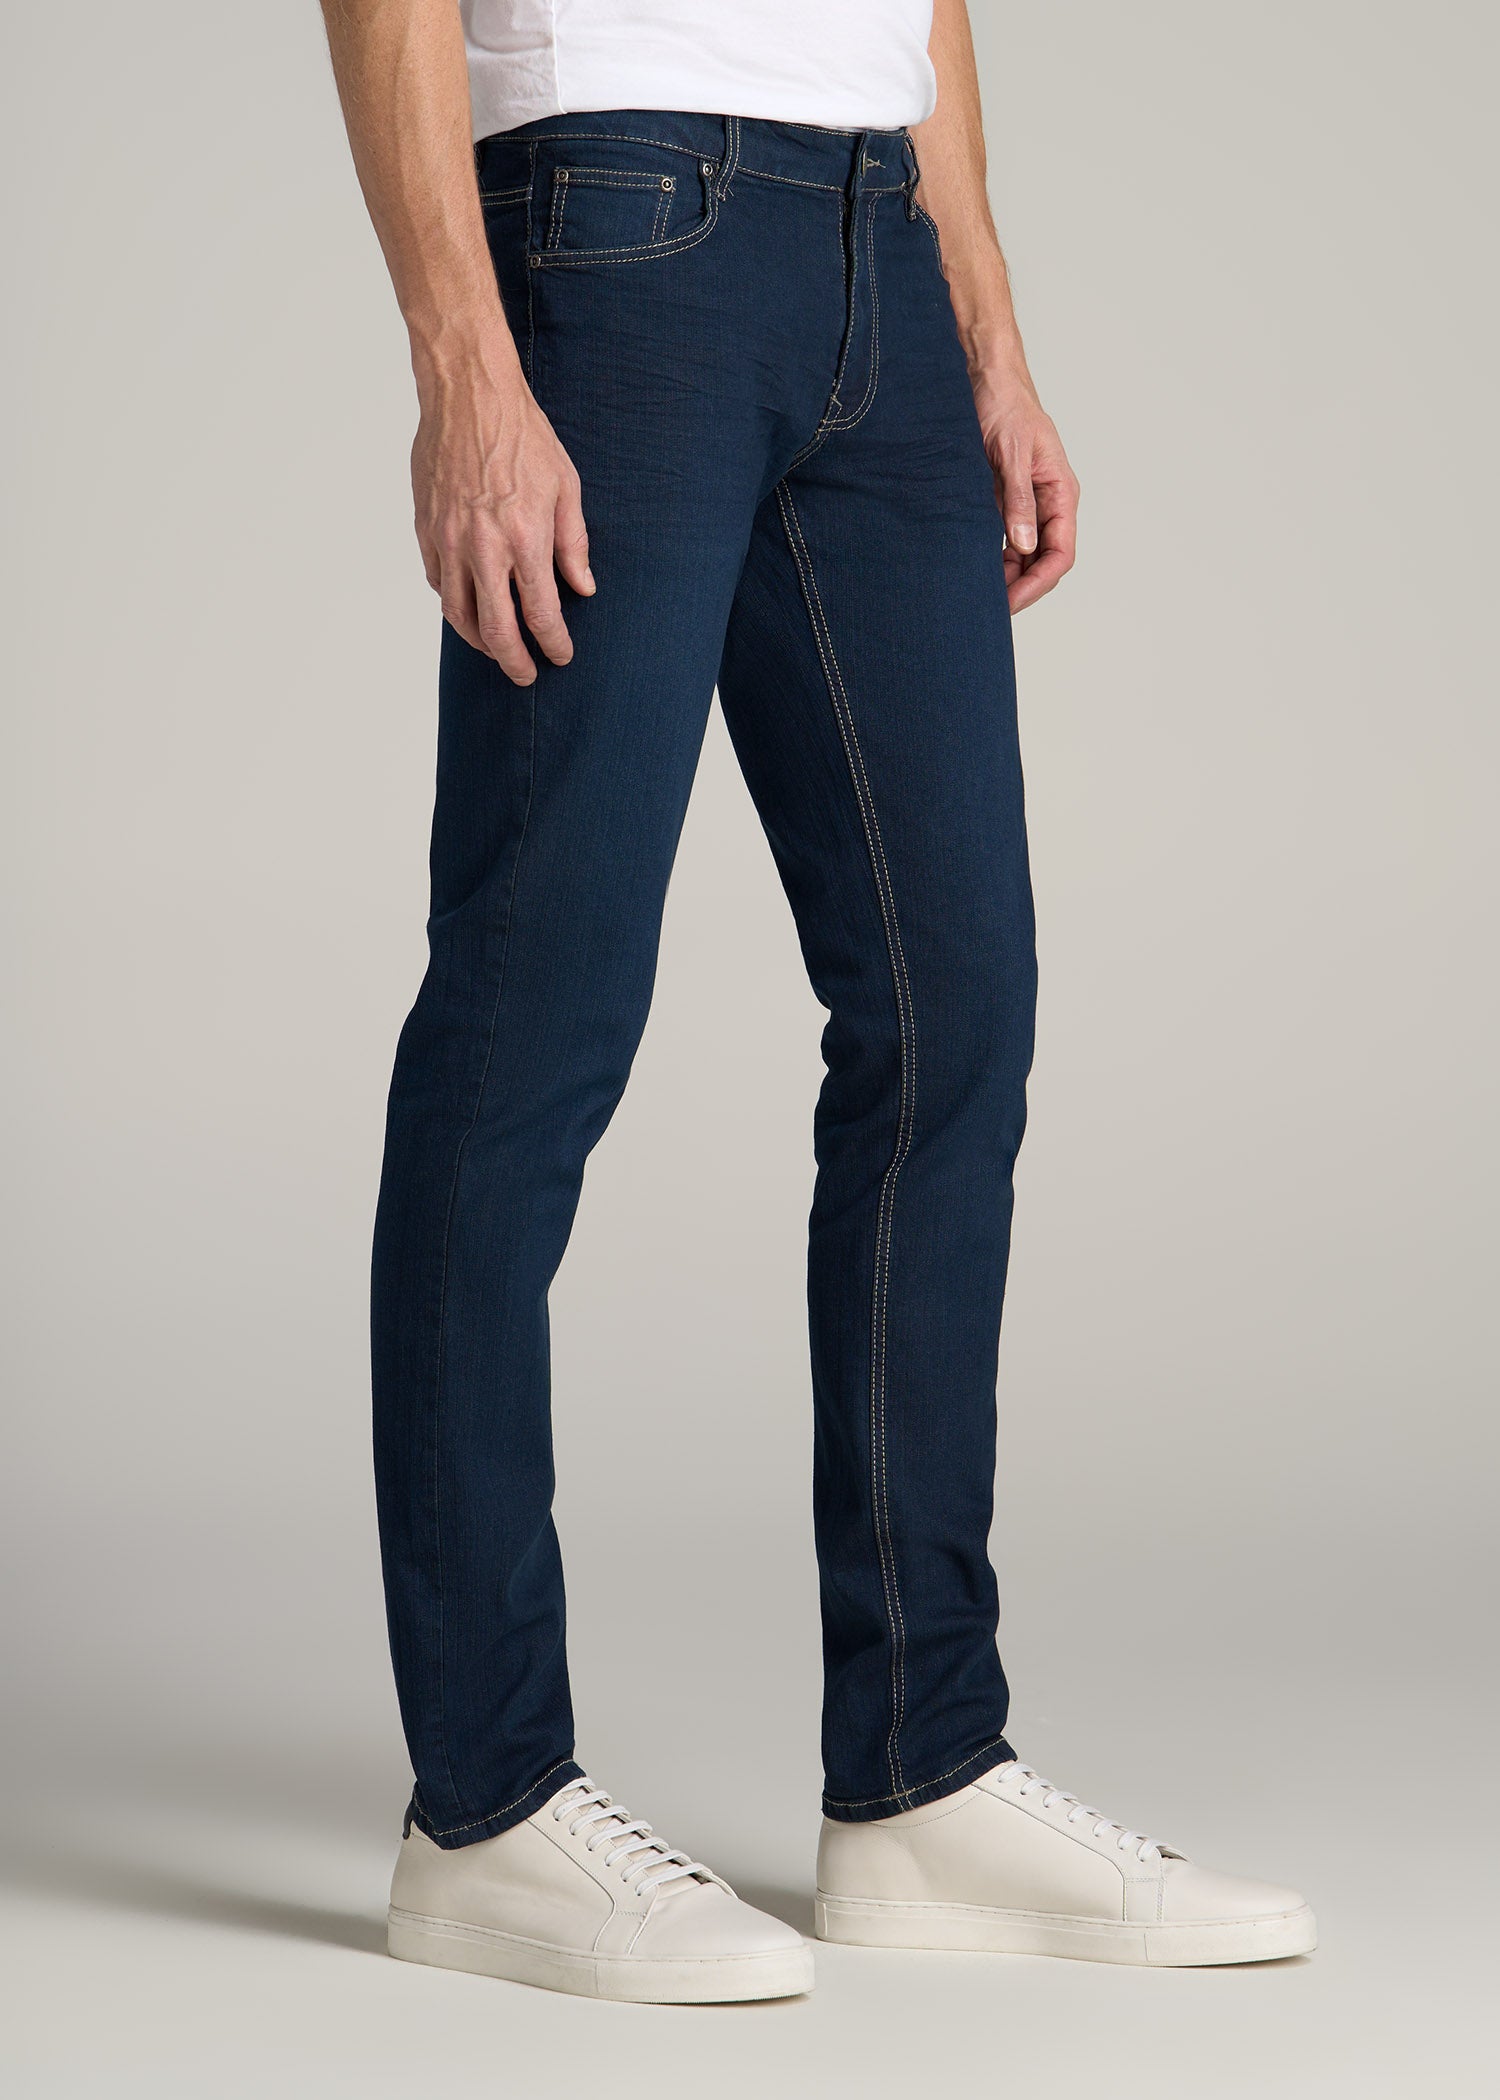 Carman Tapered Jeans For Tall Men Blue-Steel | American Tall